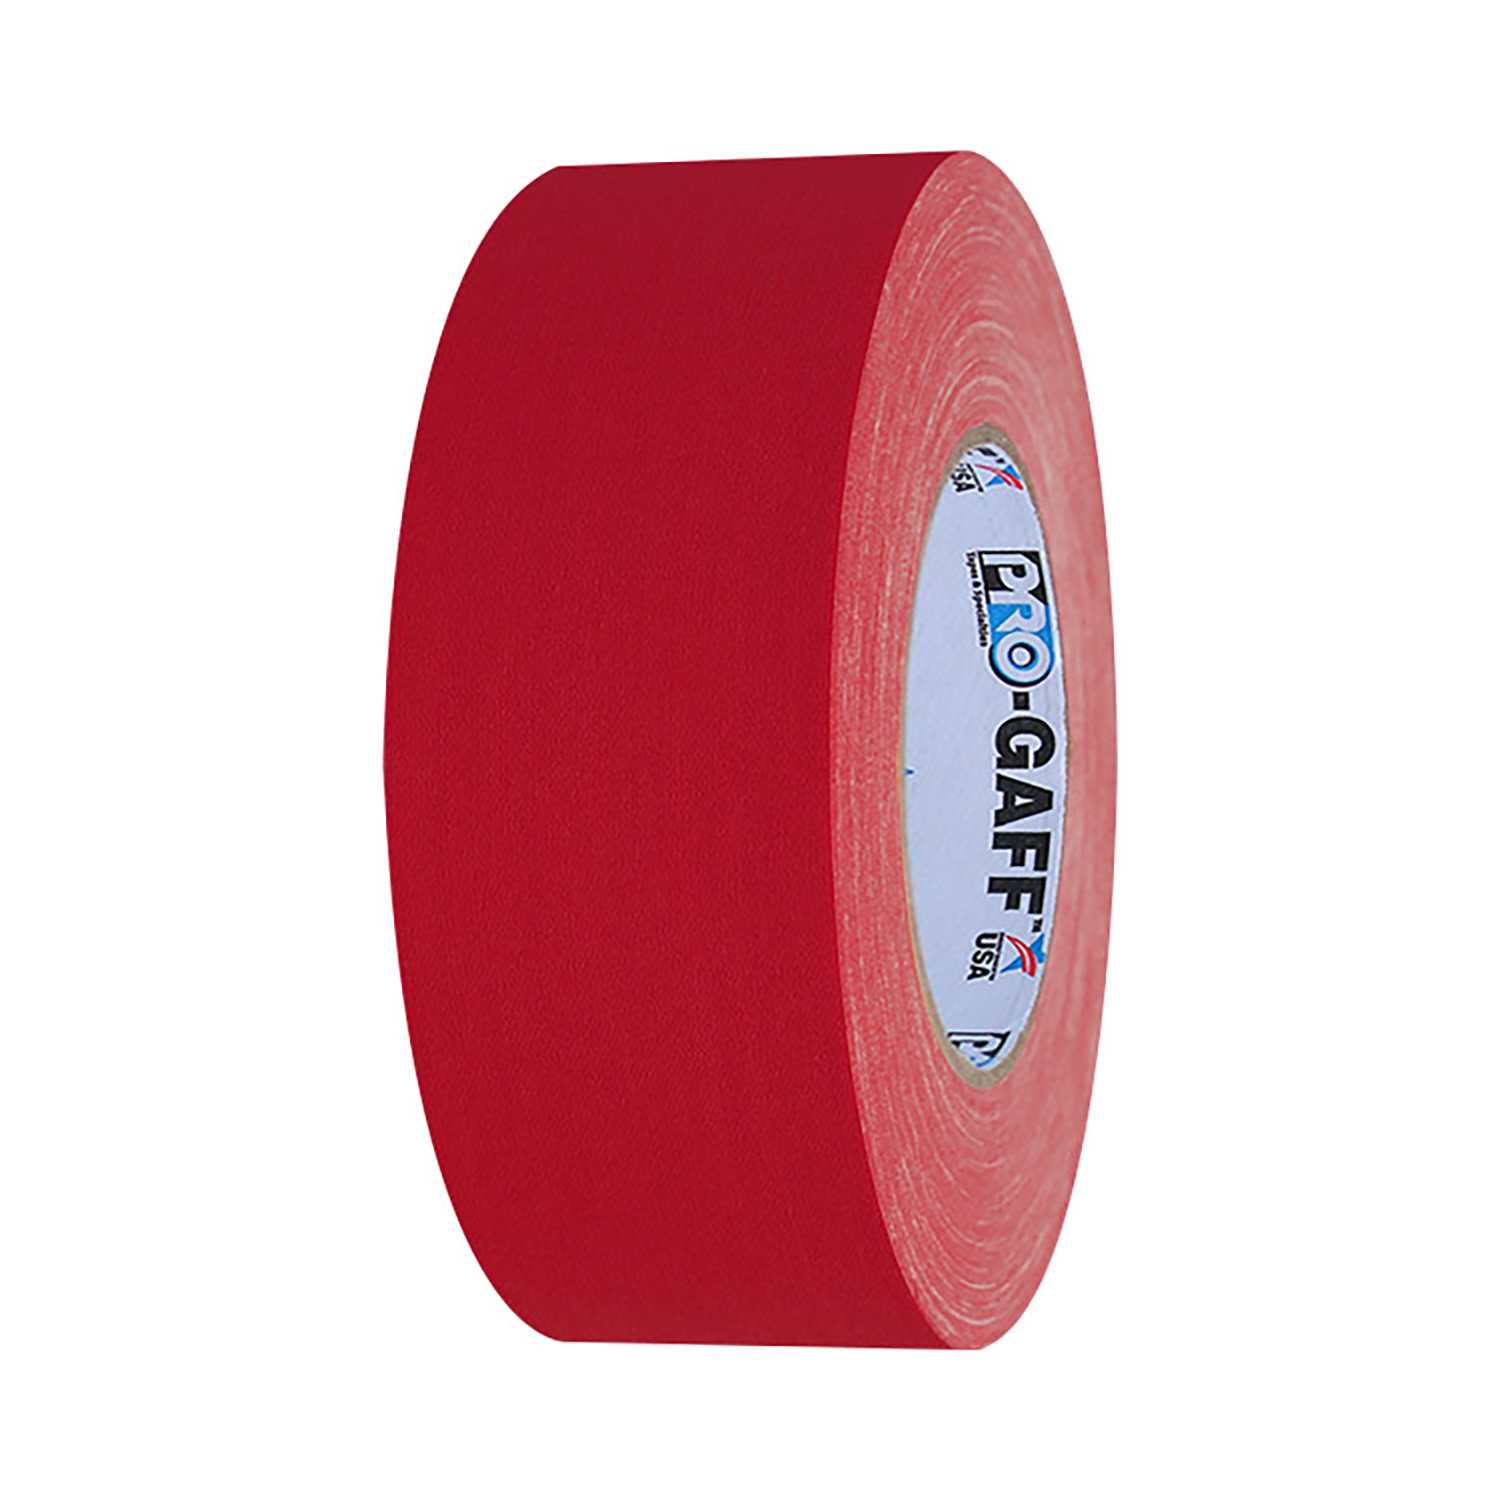 Pro Gaff Tape Cloth - Red - 55 Yards - 1"